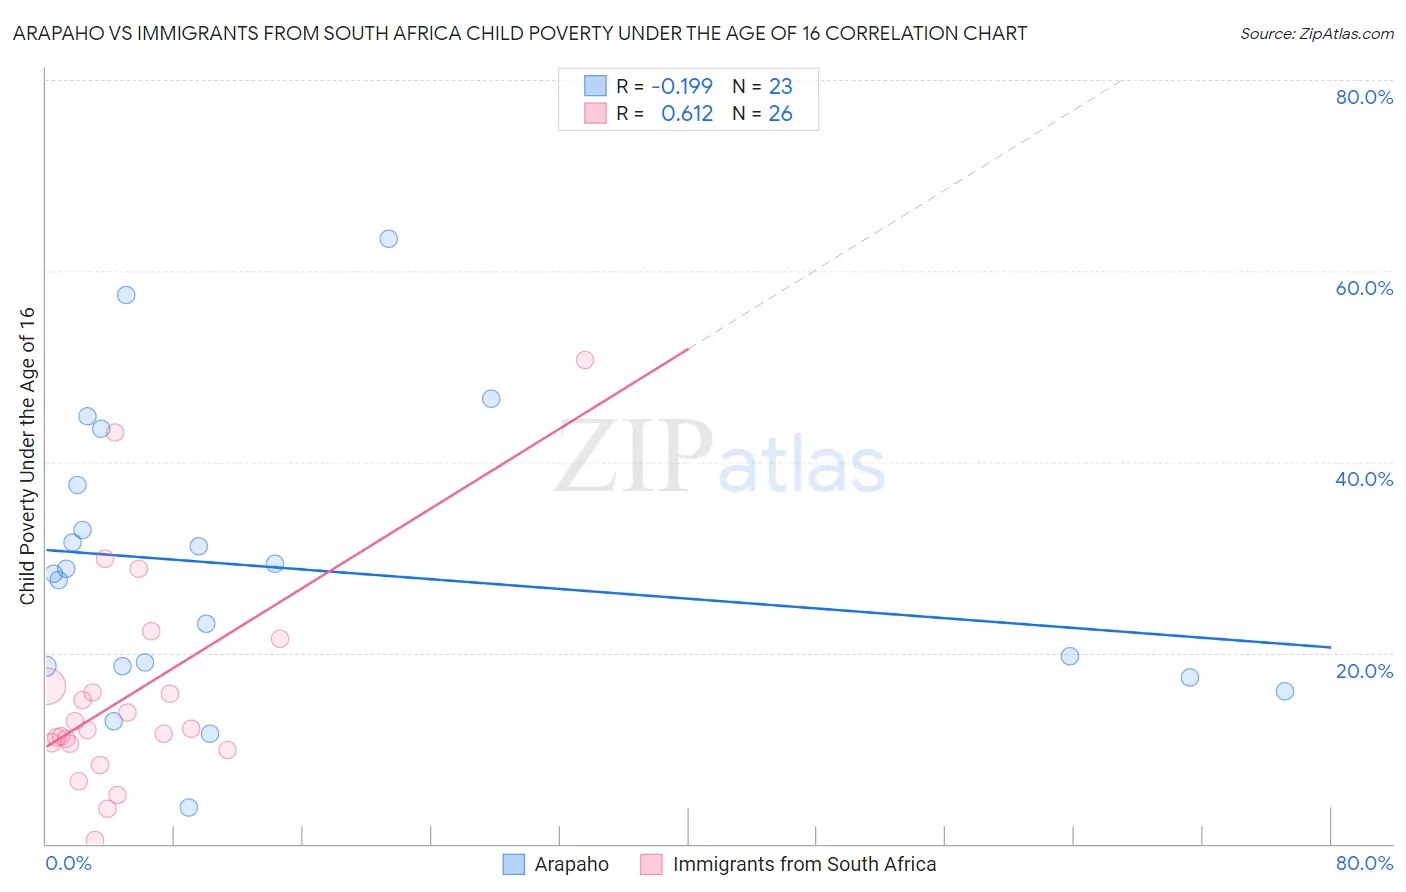 Arapaho vs Immigrants from South Africa Child Poverty Under the Age of 16